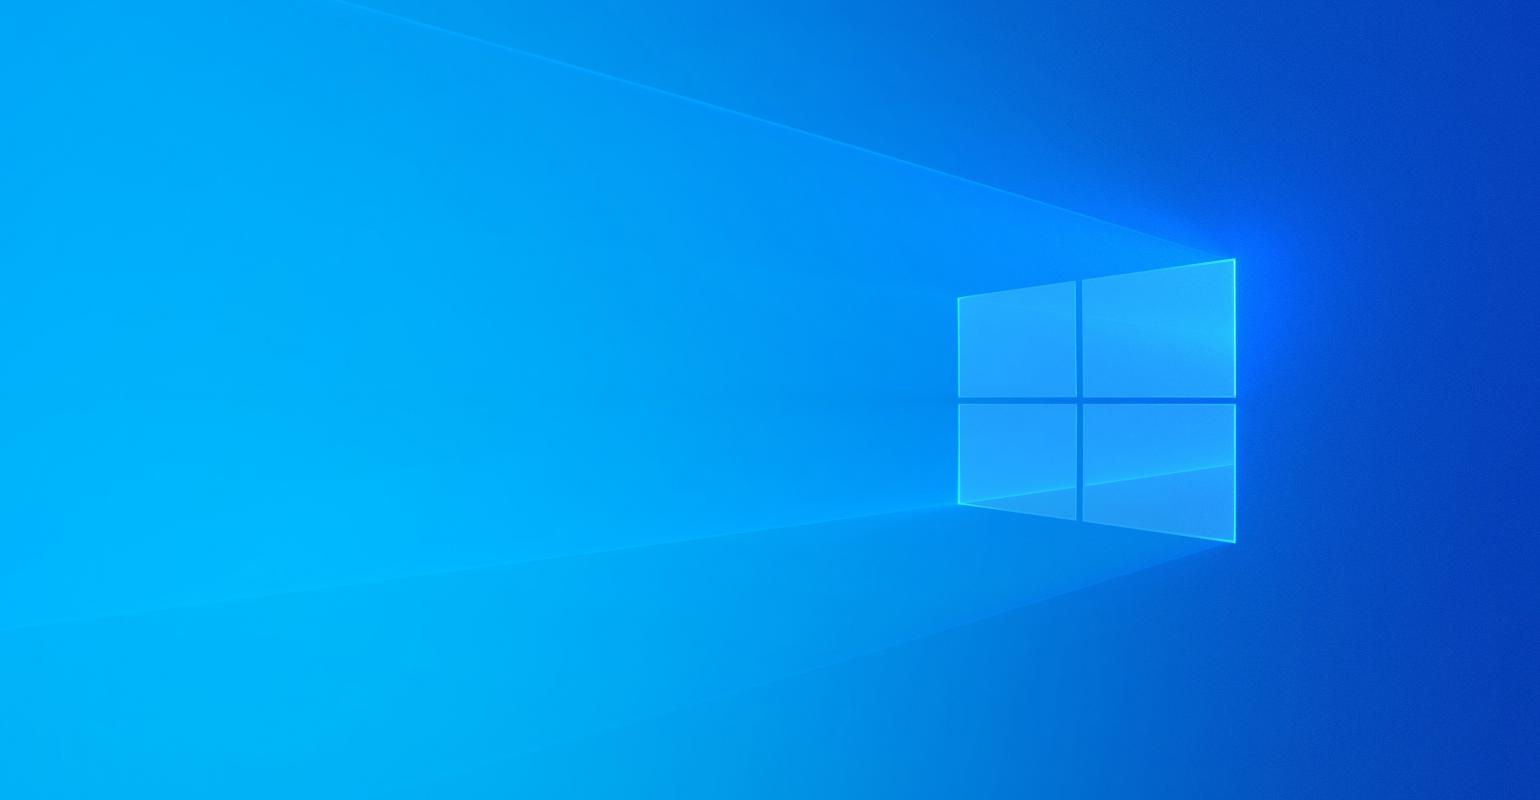 Microsoft has completely withdrawn support for the Windows 10 20H2 operating system